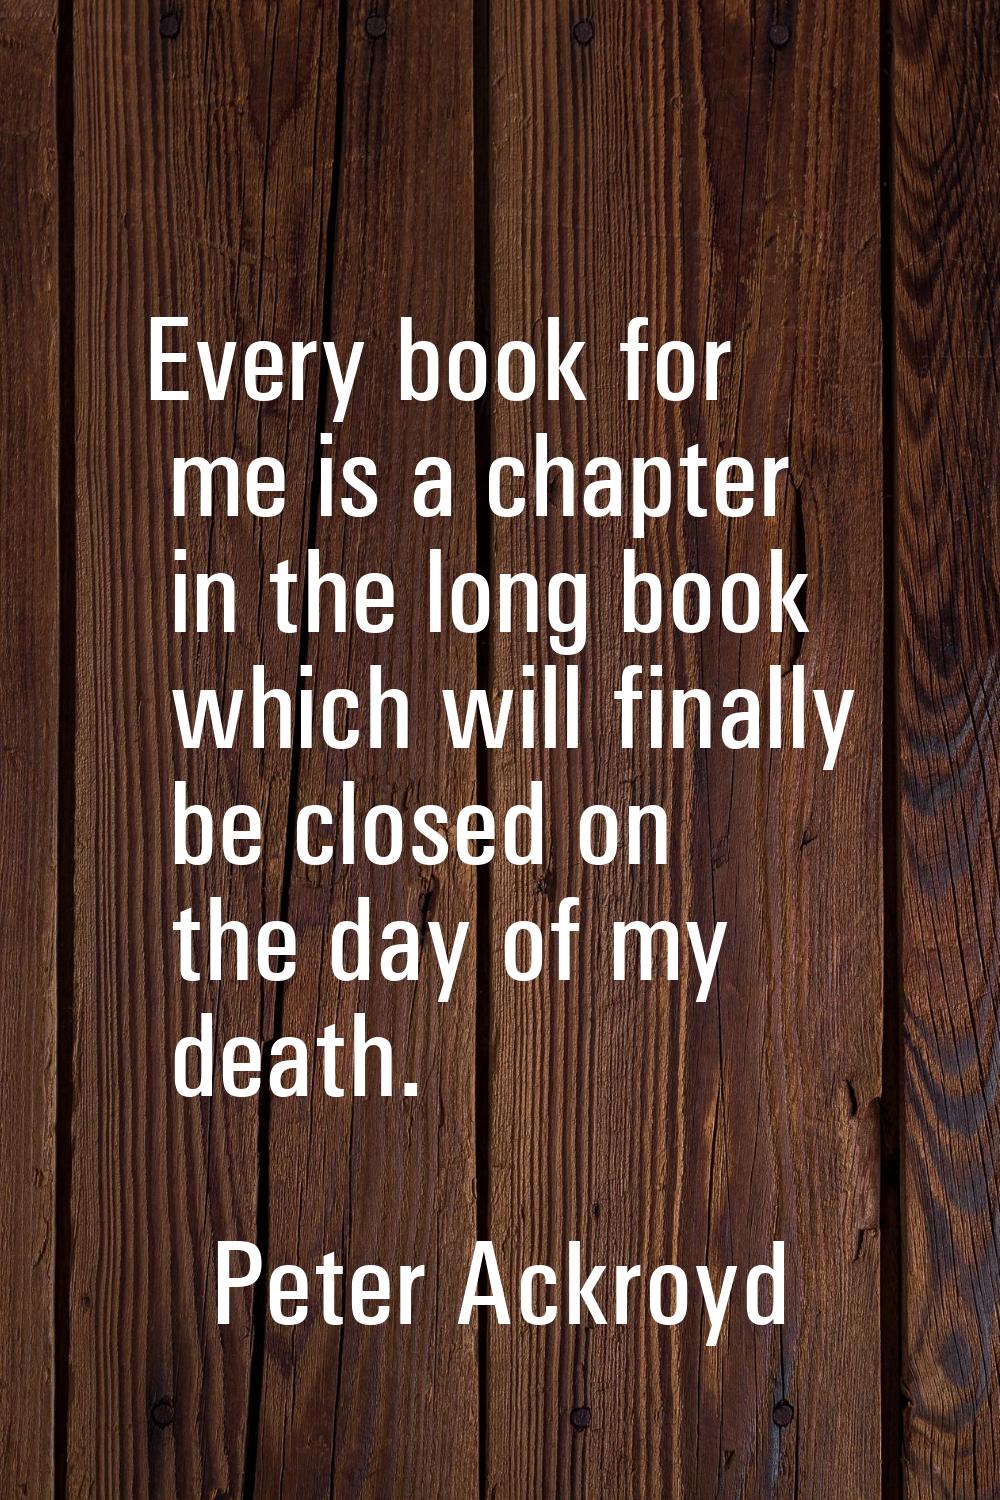 Every book for me is a chapter in the long book which will finally be closed on the day of my death